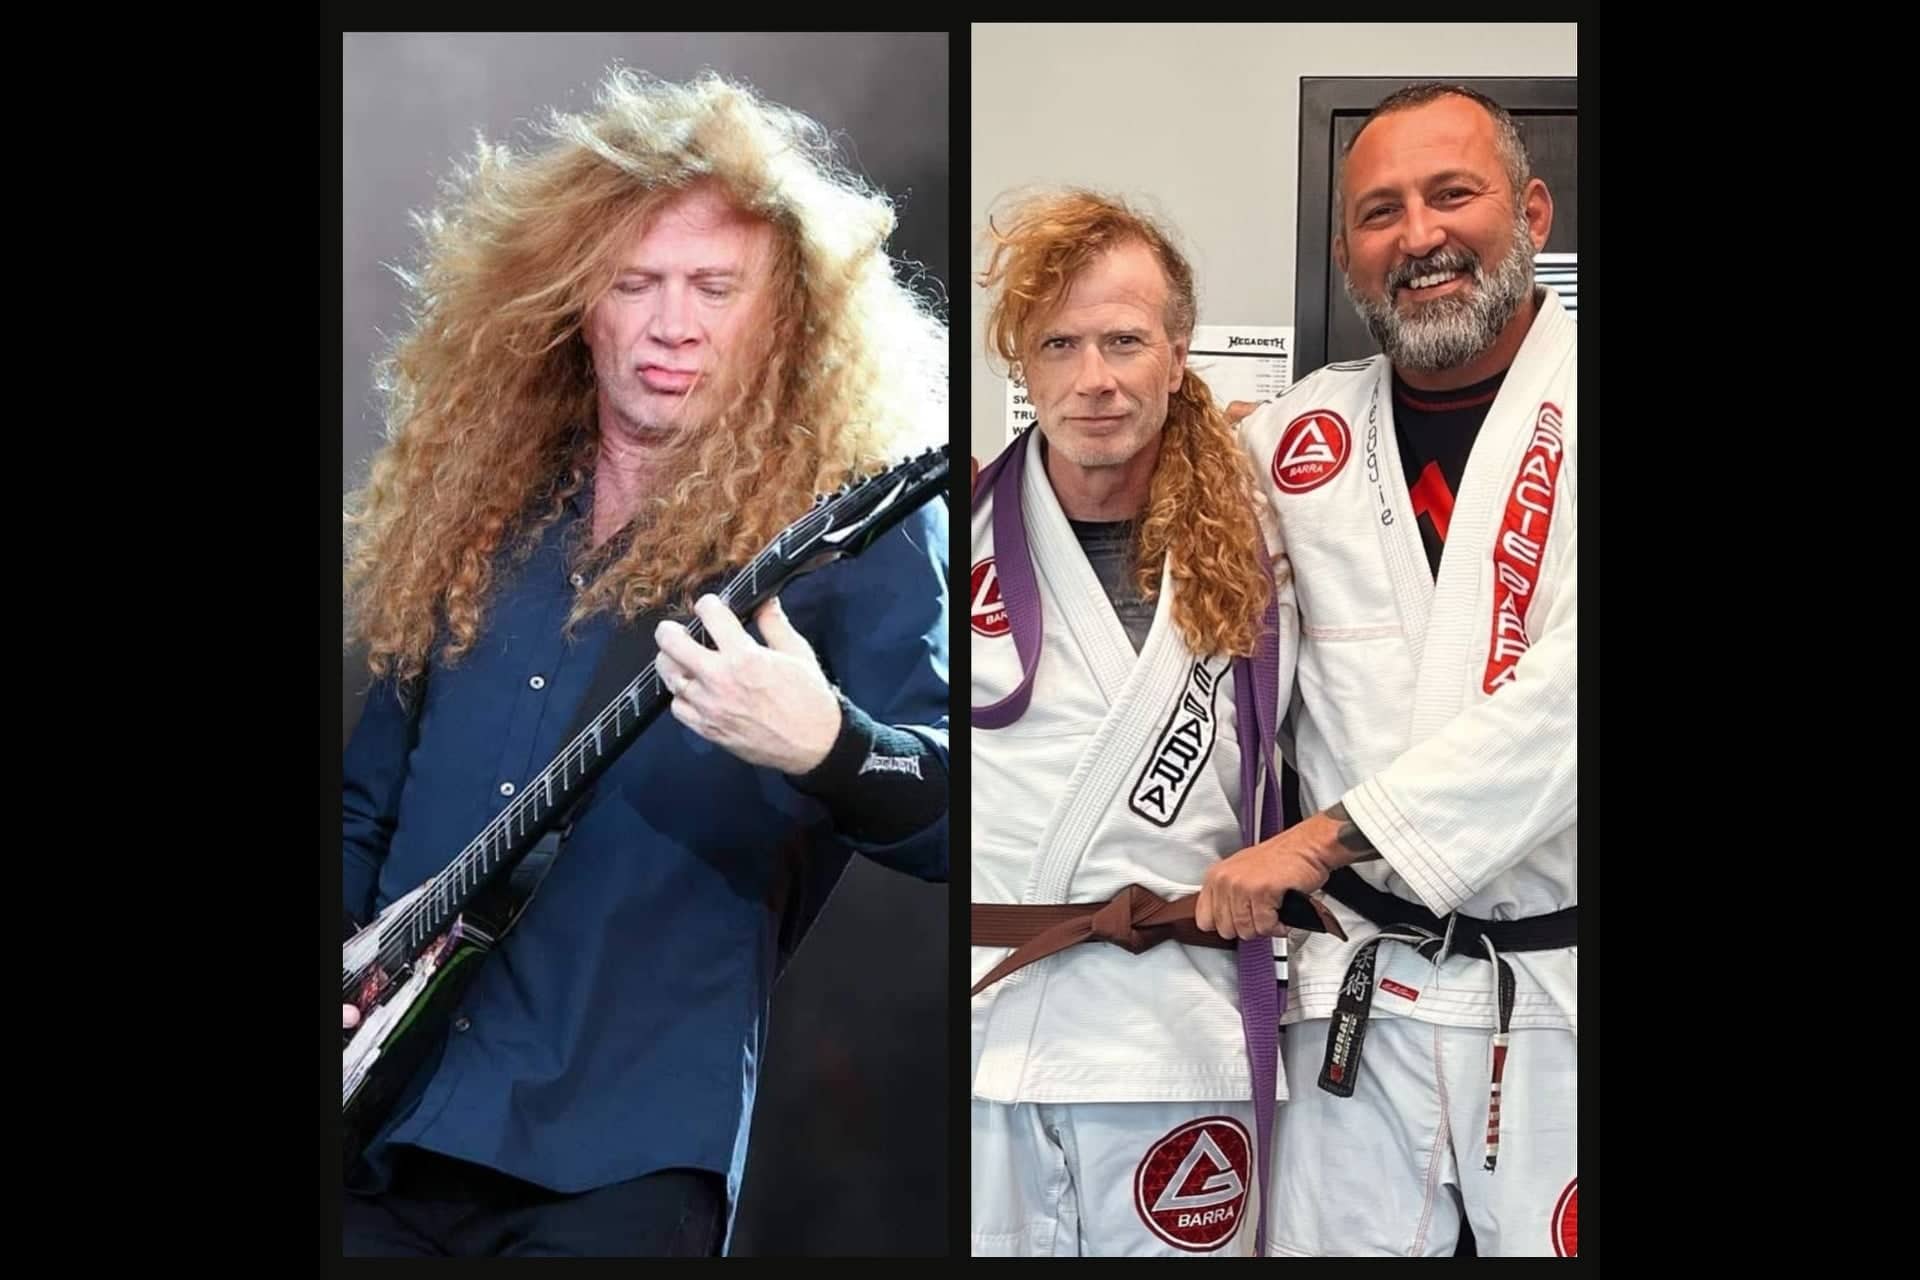 Read more about the article MEGADETH’s Dave Mustaine Earns Jiu-Jitsu Brown Belt At 61 Years Old.